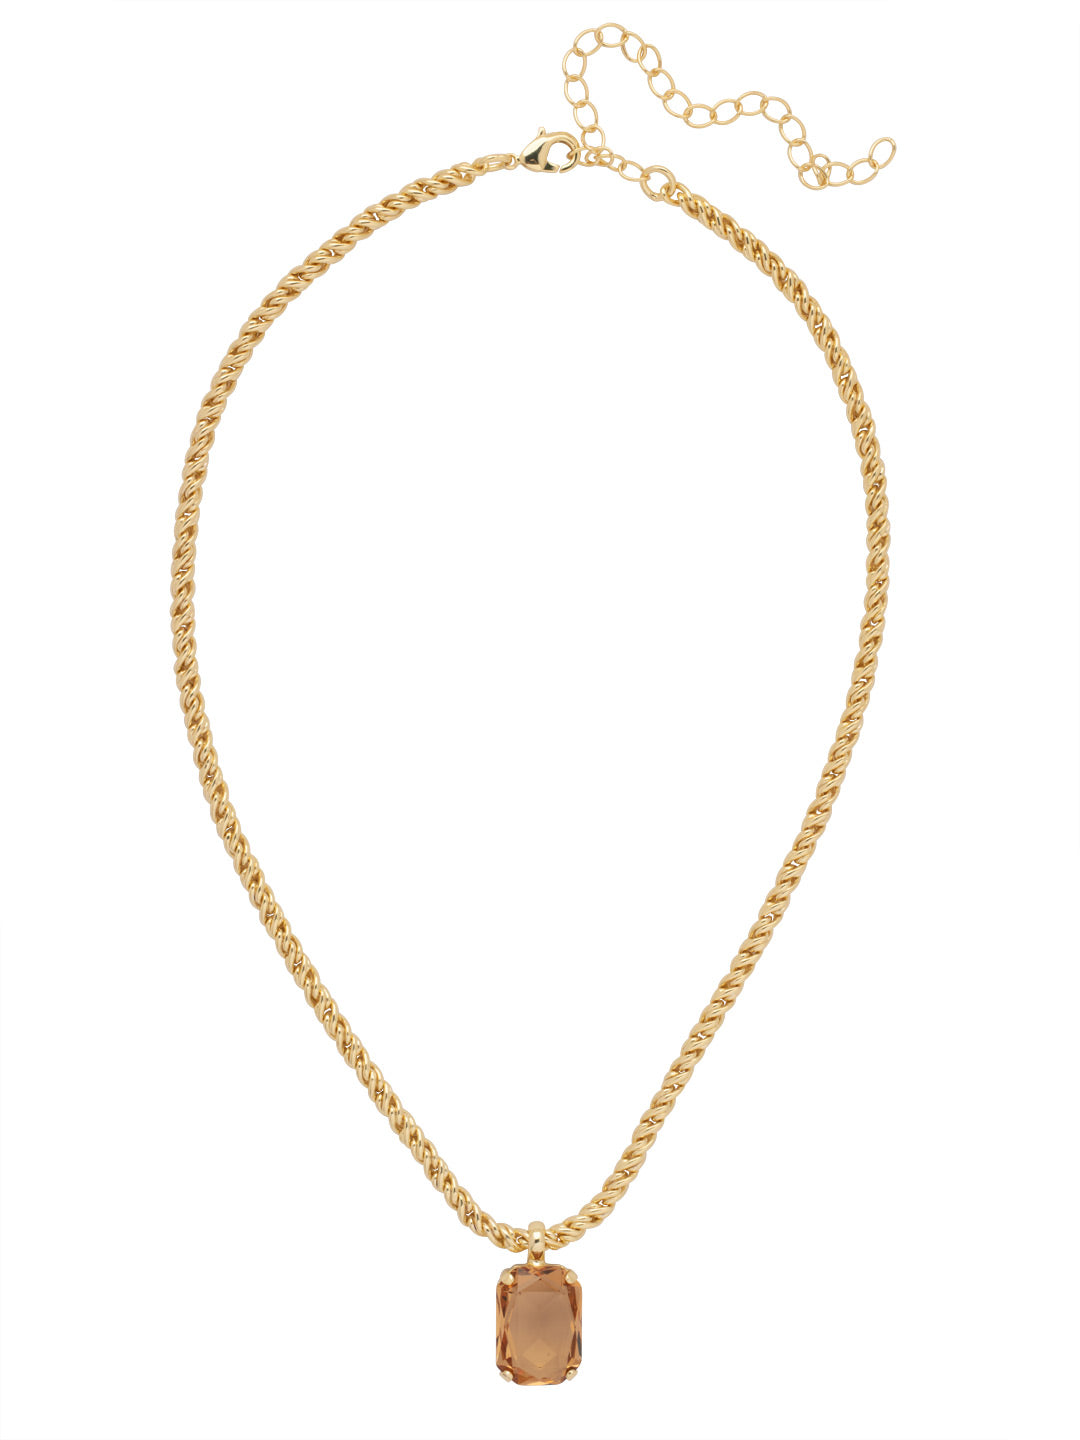 Kathleen Pendant Necklace - NFF8BGLC - <p>The Kathleen Pendant Necklace features a trendy emerald cut candy gem on an adjustable rope chain, secured by a lobster claw clasp. From Sorrelli's Light Colorado collection in our Bright Gold-tone finish.</p>